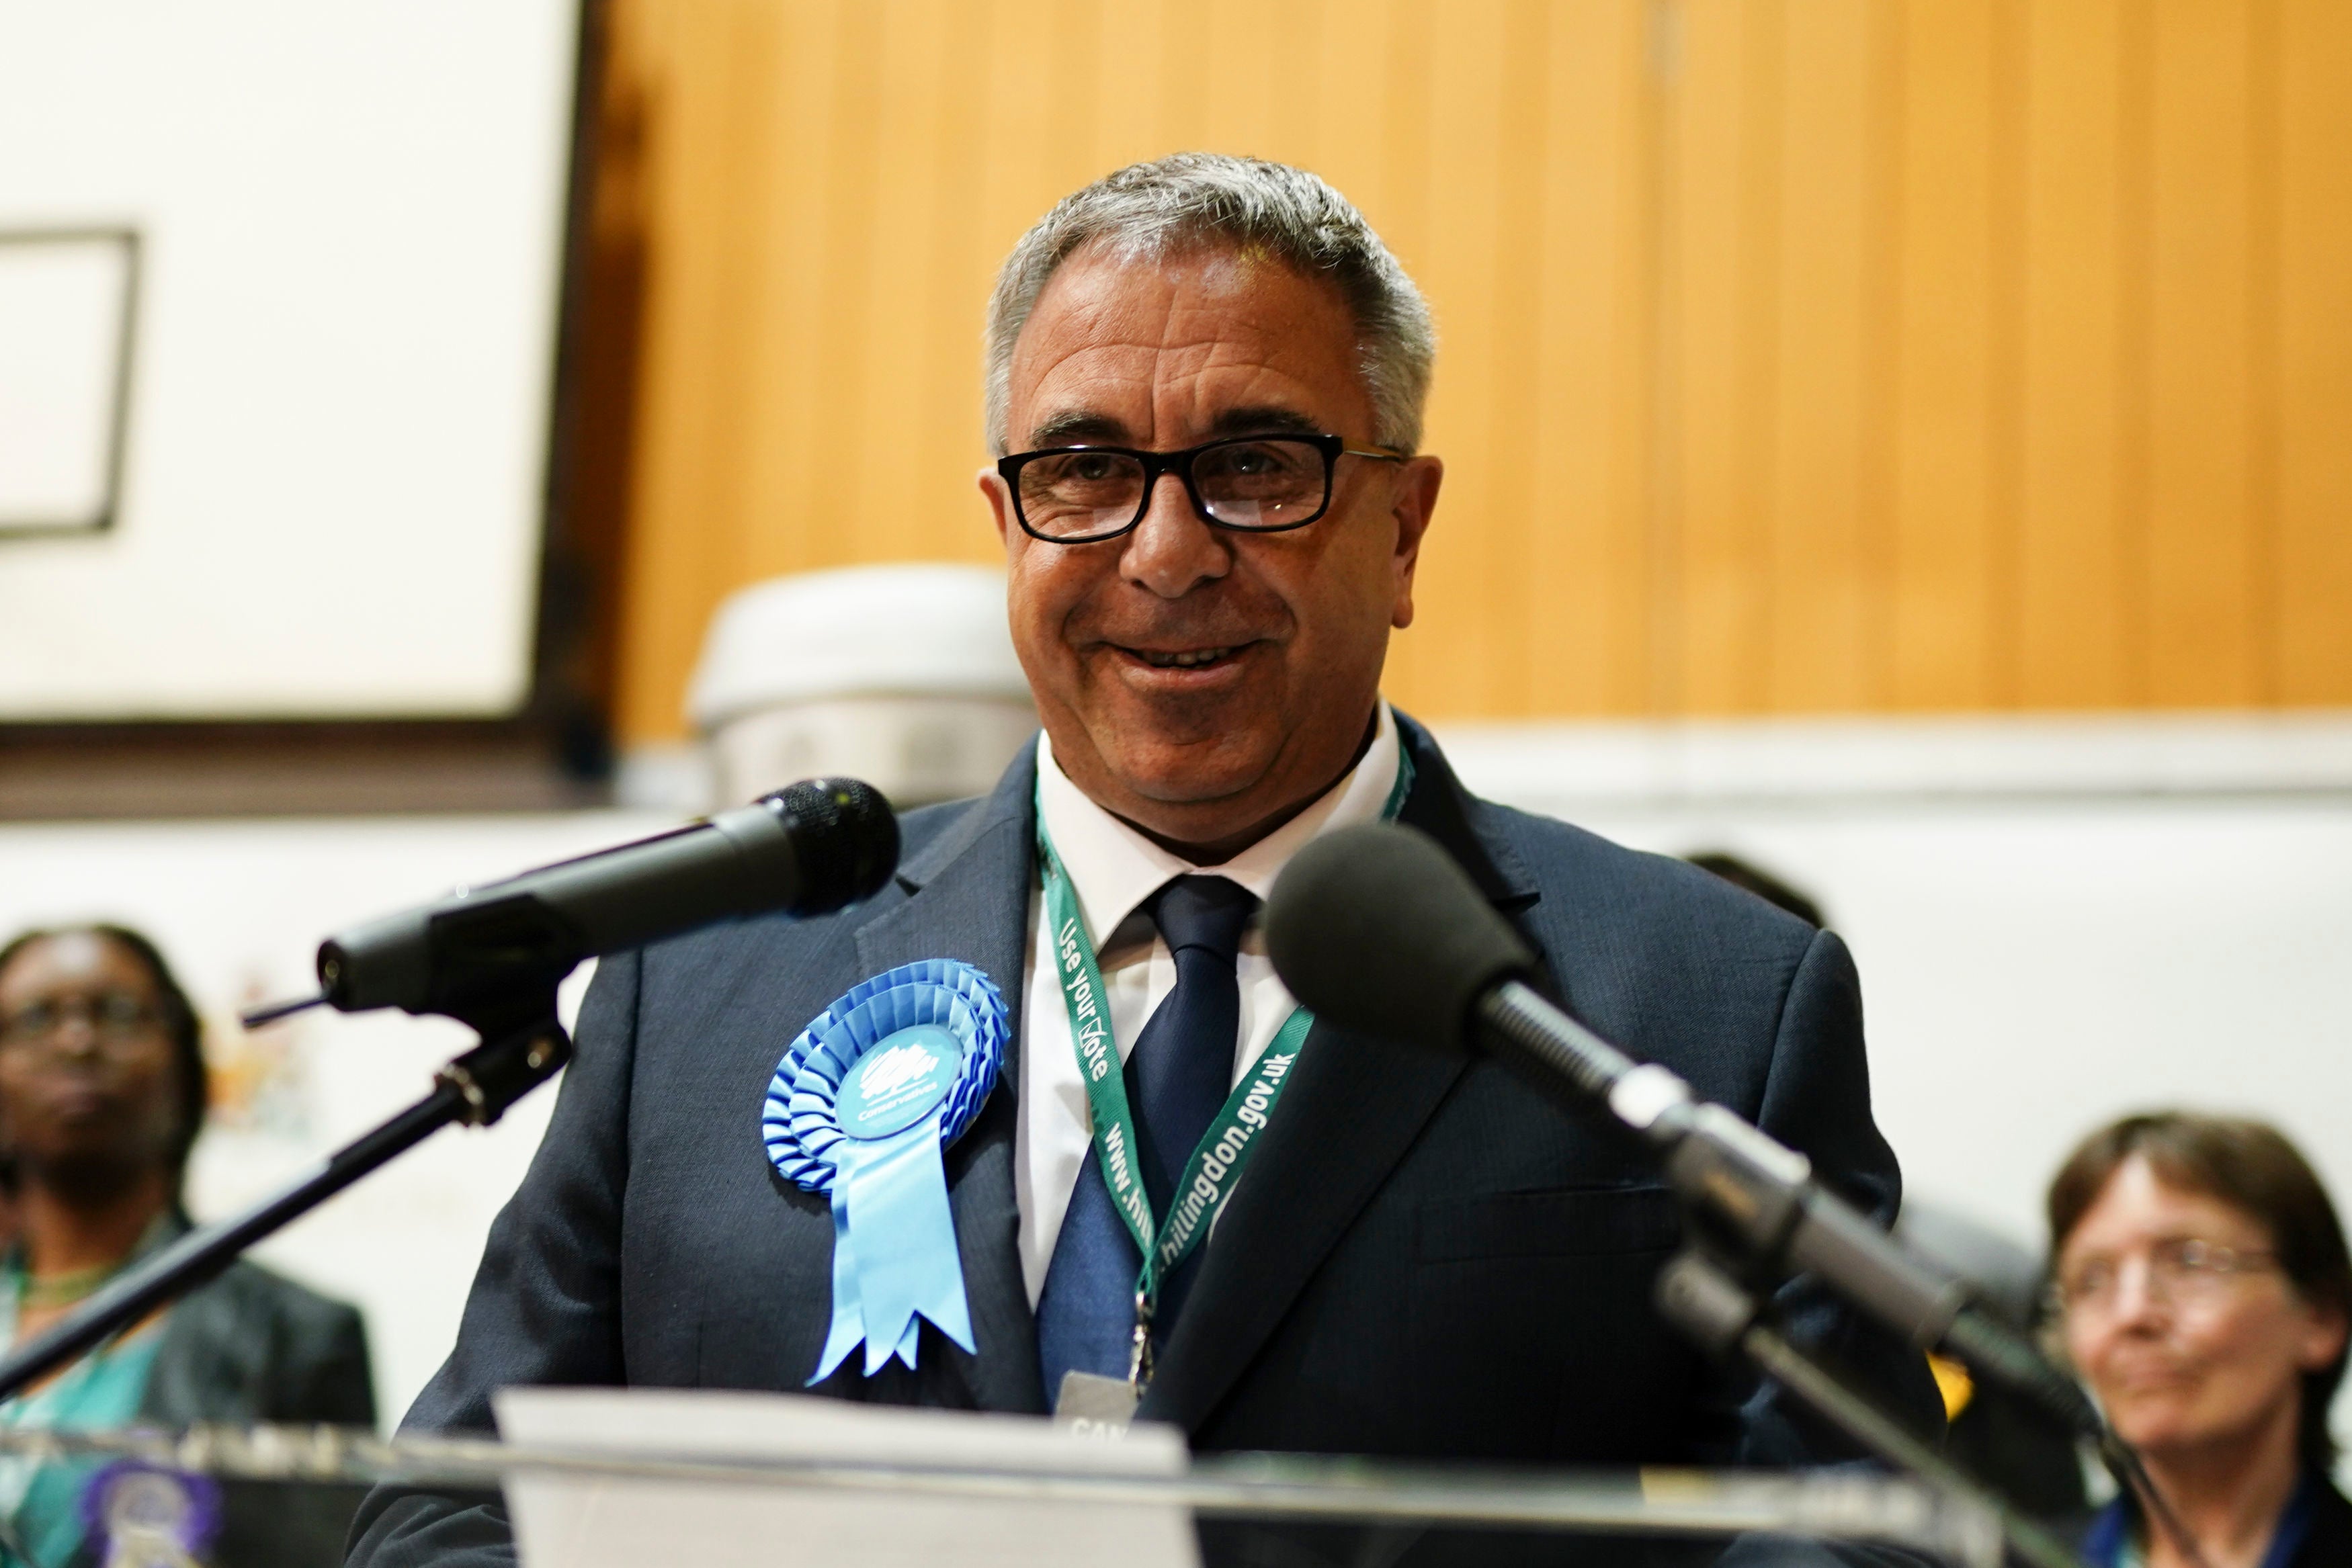 Conservative MP Steve Tuckwell delivers a speech after winning the Uxbridge and South Ruislip by-election